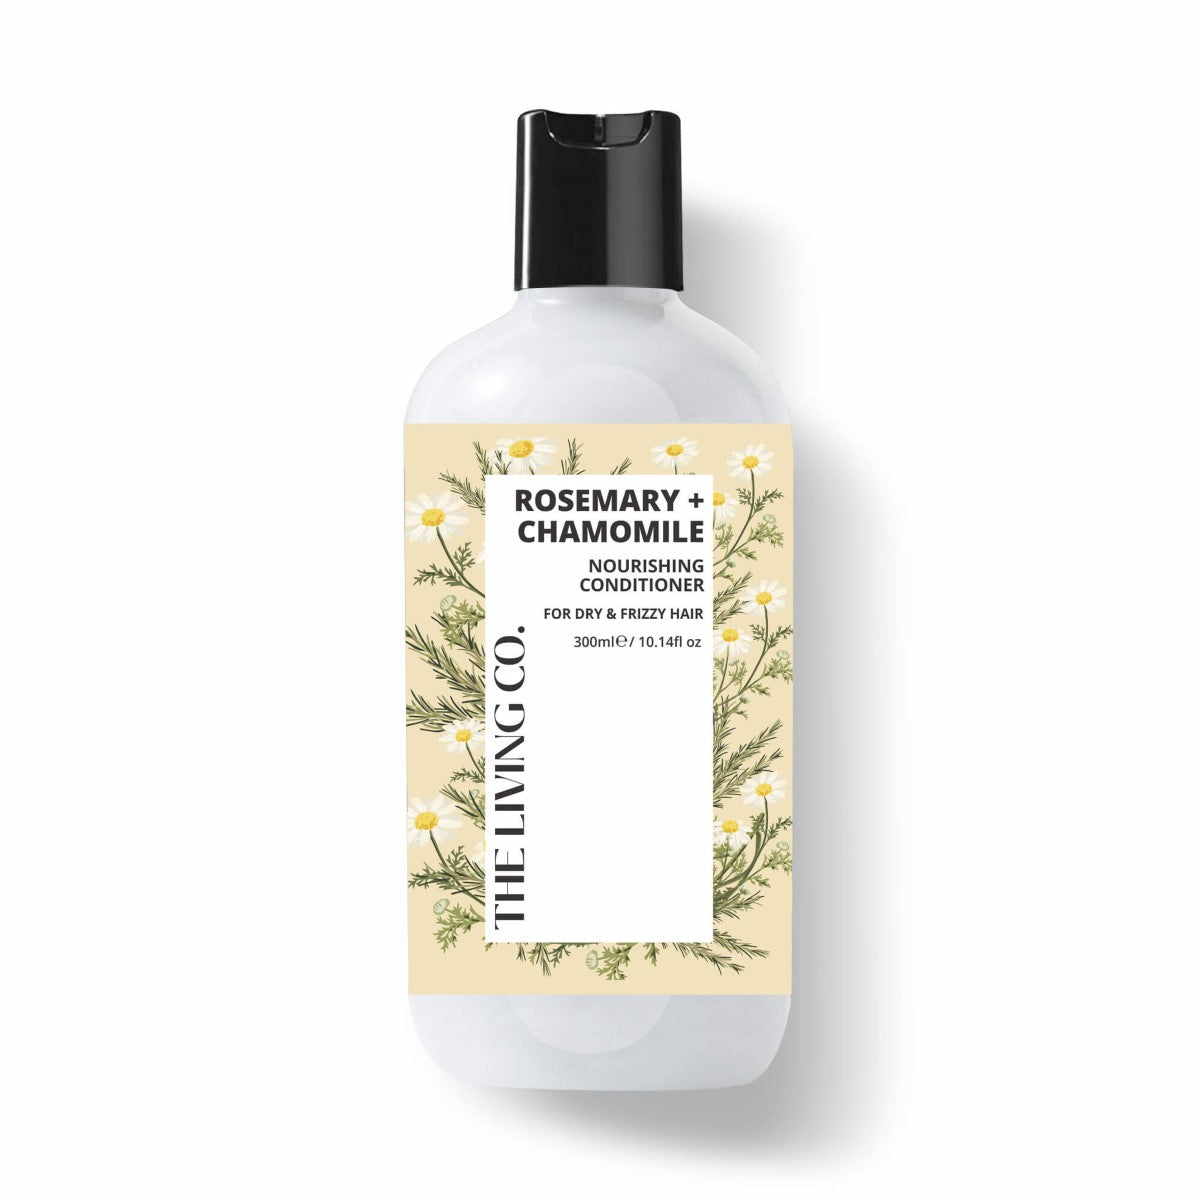 Nourishing Conditioner With Rosemary + Chamomile